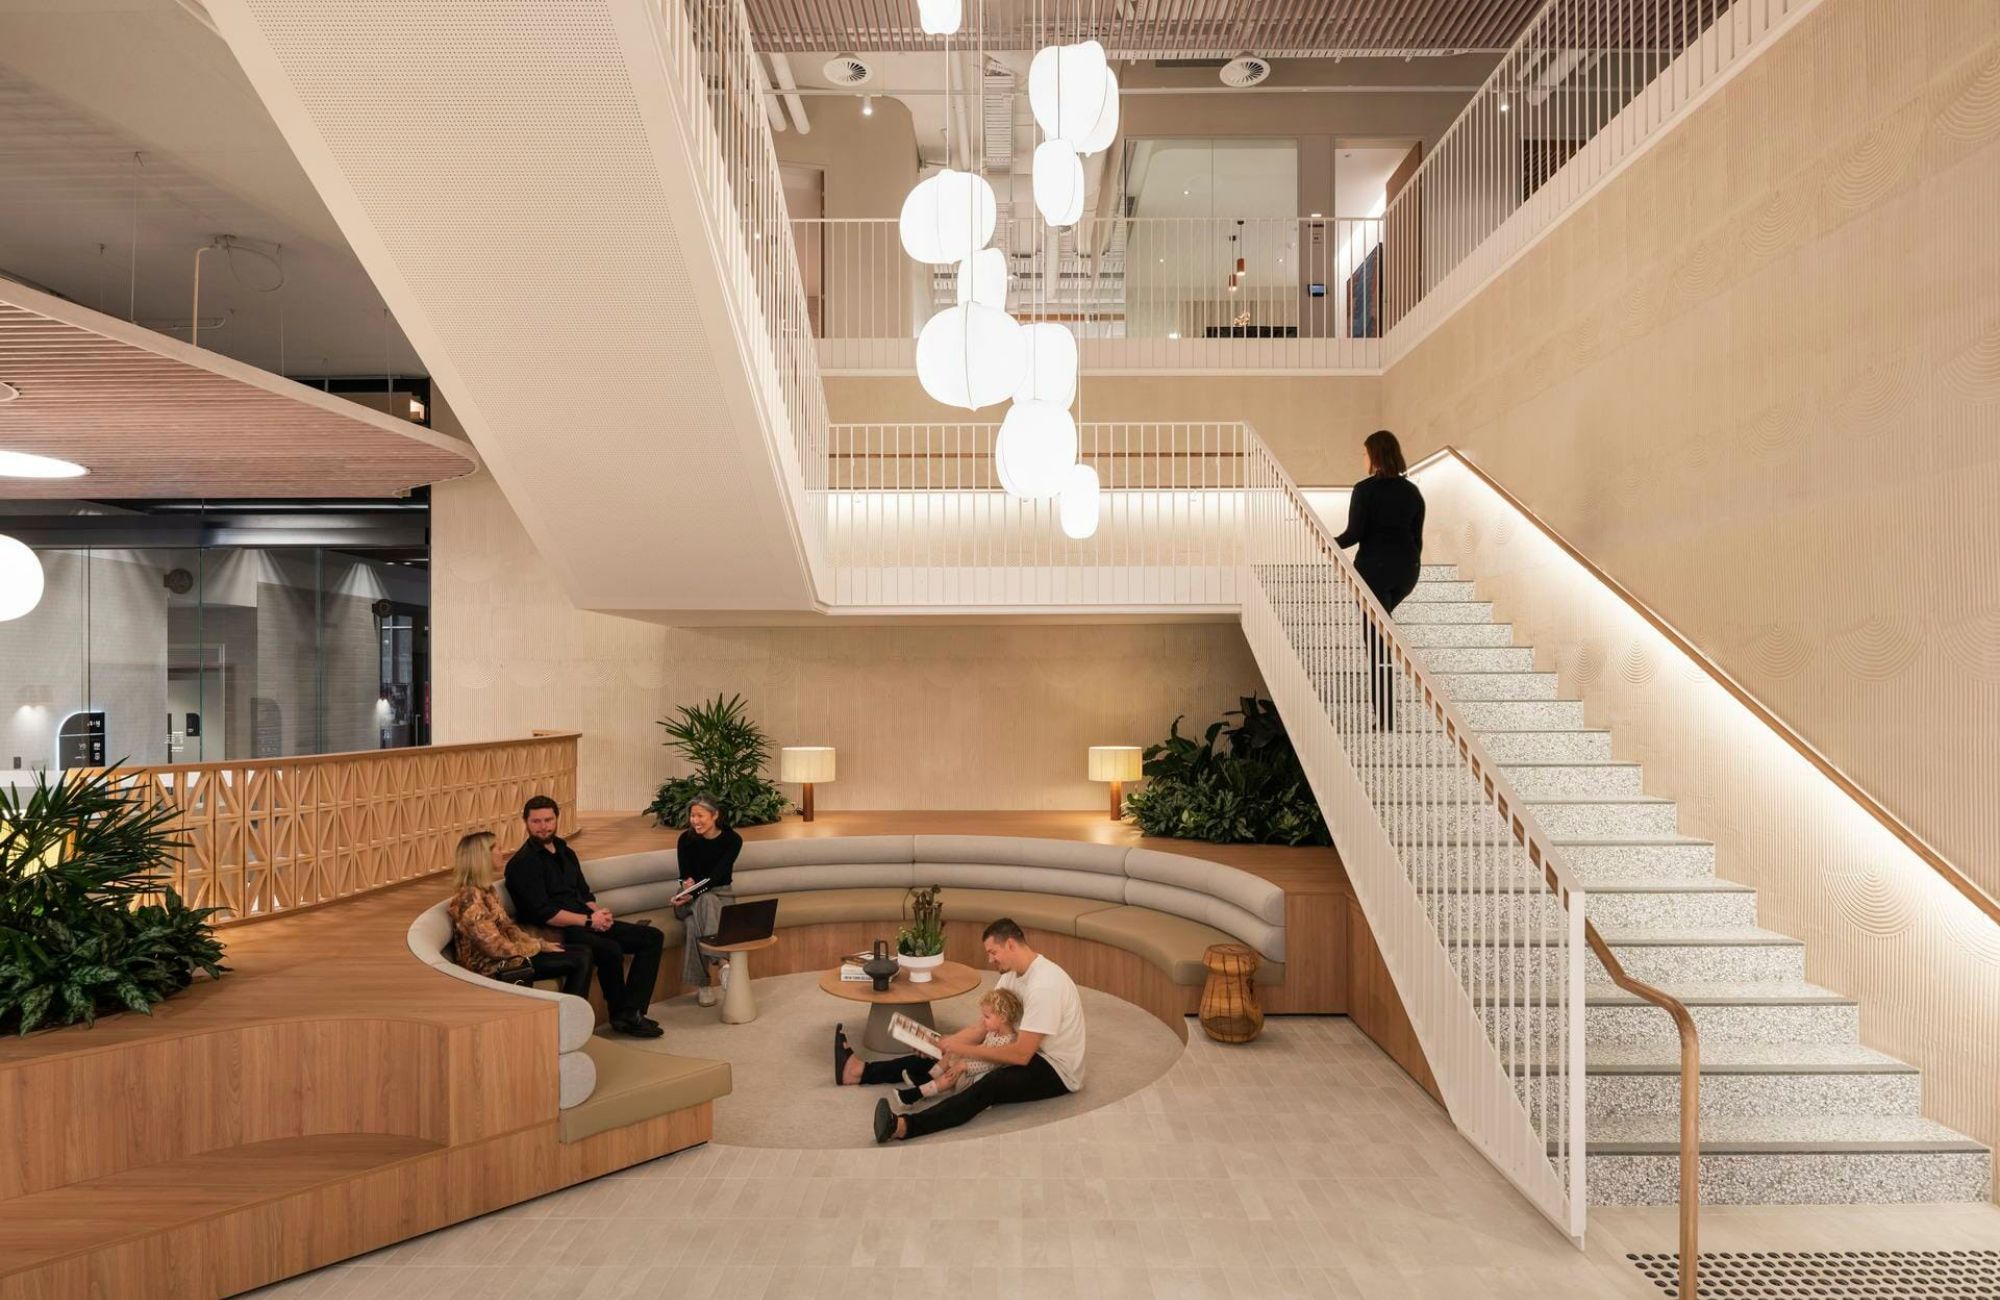 ABN Group HQ by Woods Bagot. Communal seating area, featuring steps to next floor